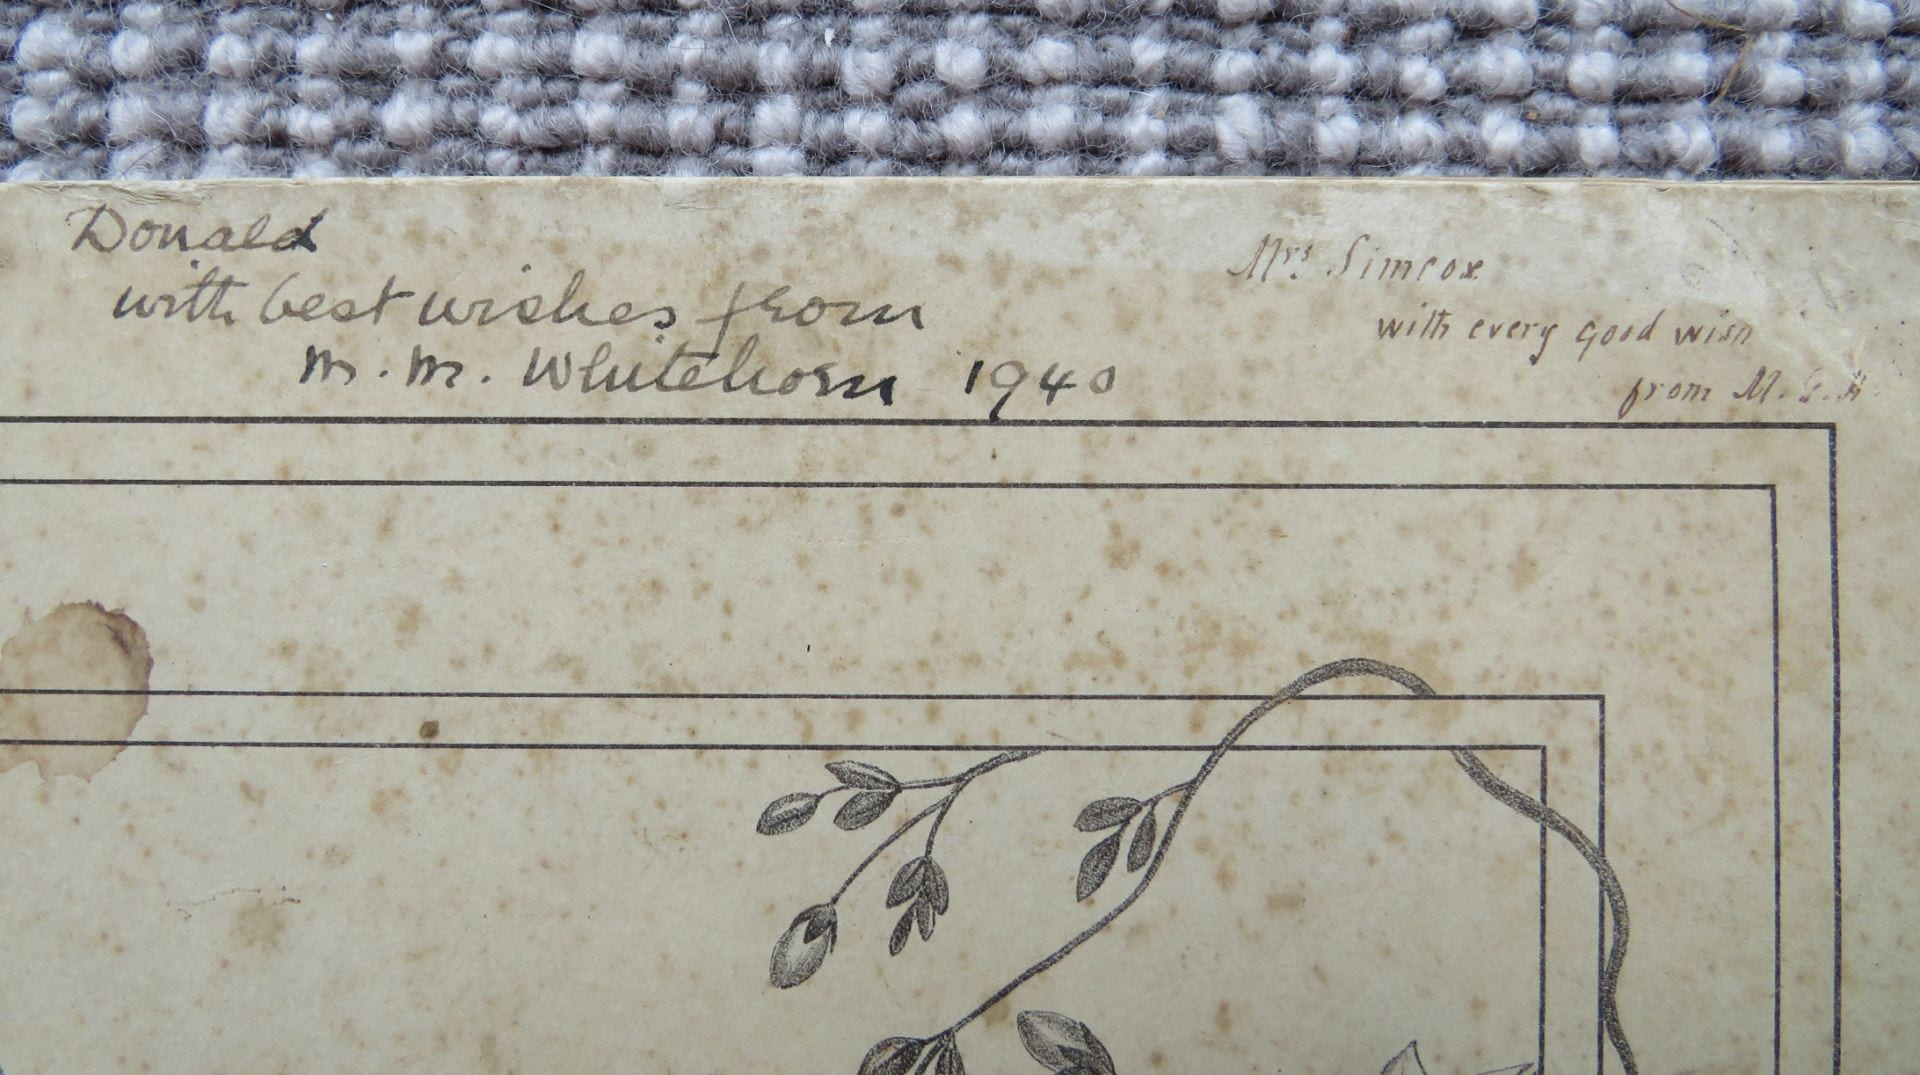 Photo of inscriptions written neatly at the top of the photographed booklet, in two different handwritings